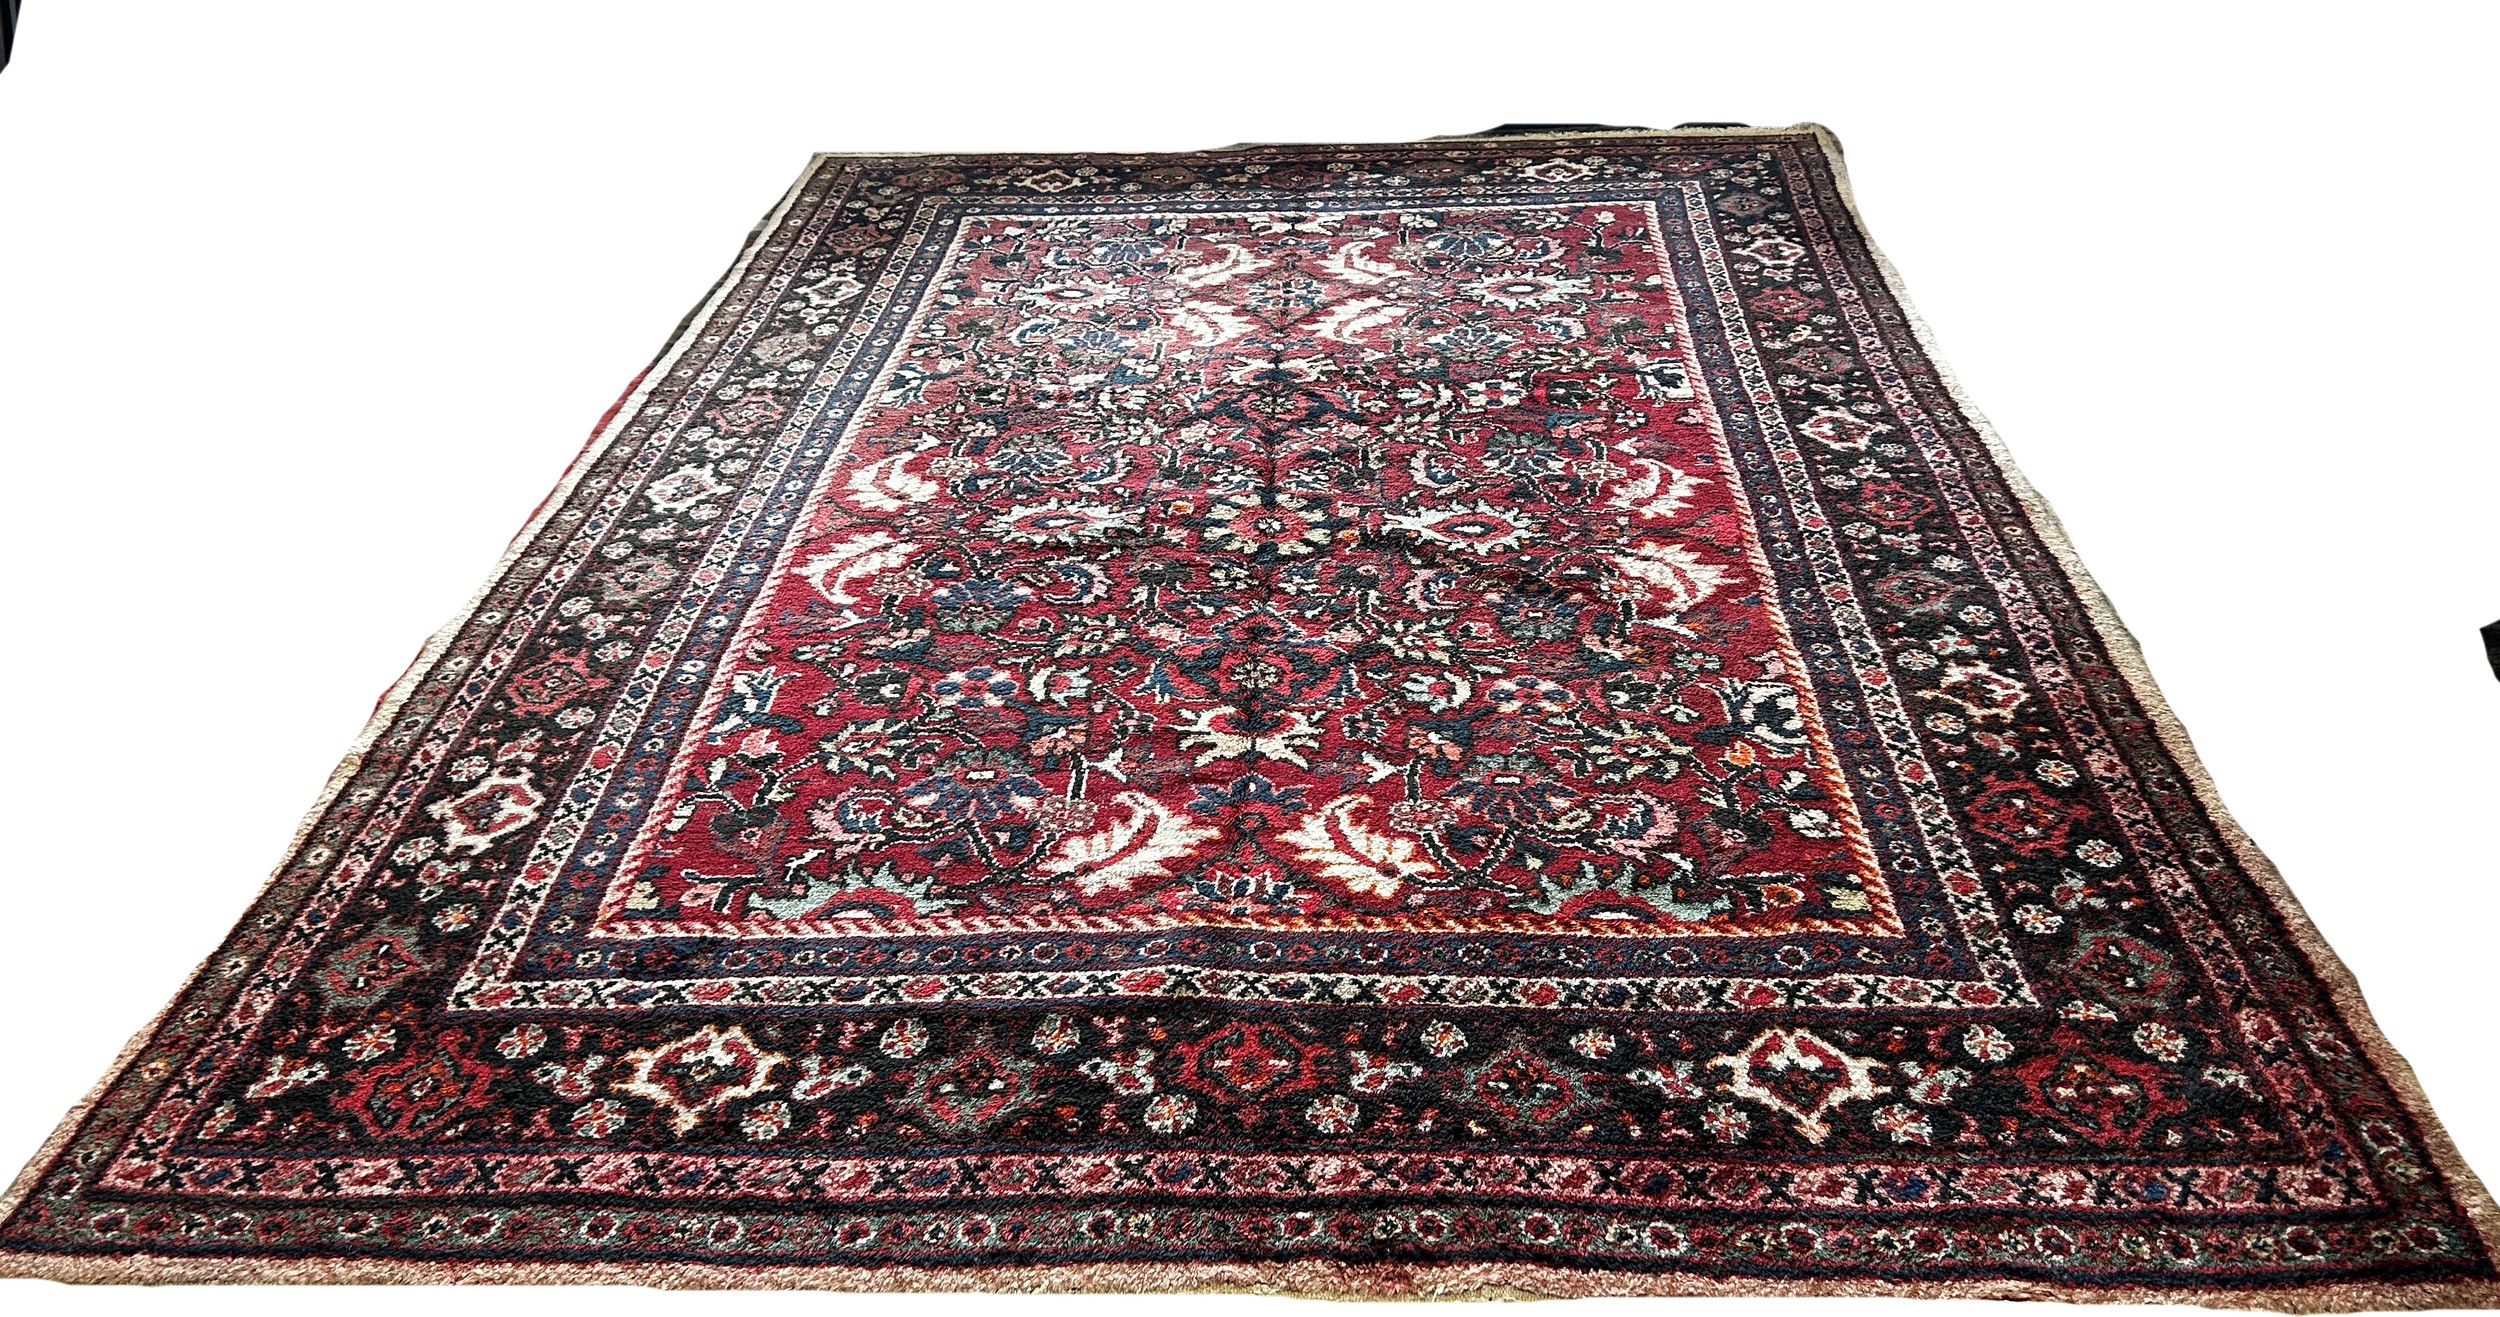 A Persian Hamadan type carpet with an all over floral pattern on a predominantly red ground, 290 x - Image 2 of 3